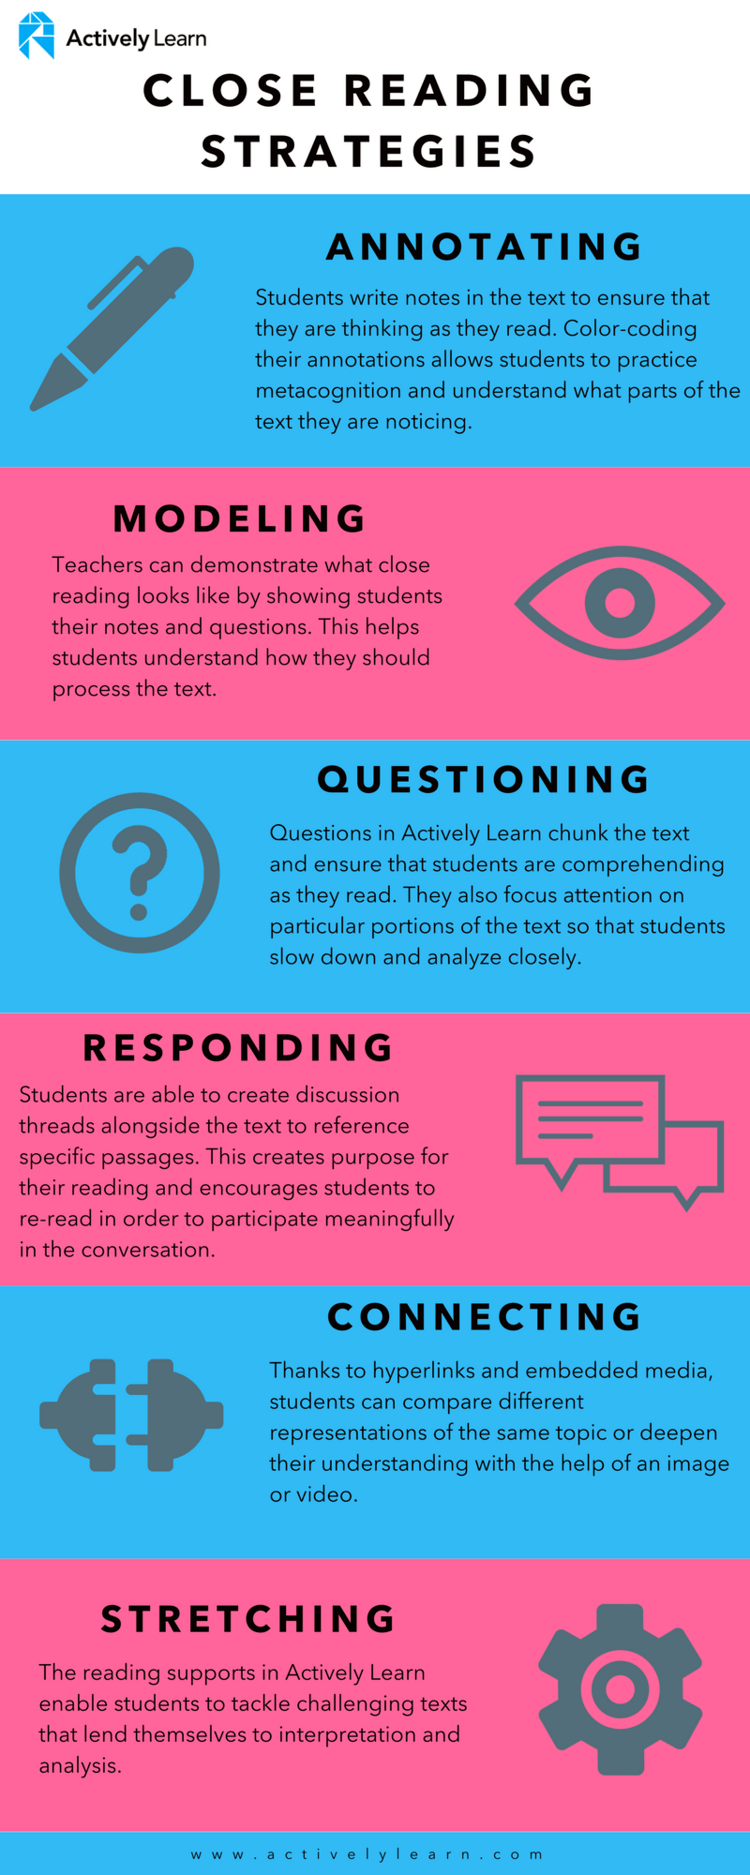 Close Reading Strategies with Actively Learn Infographic